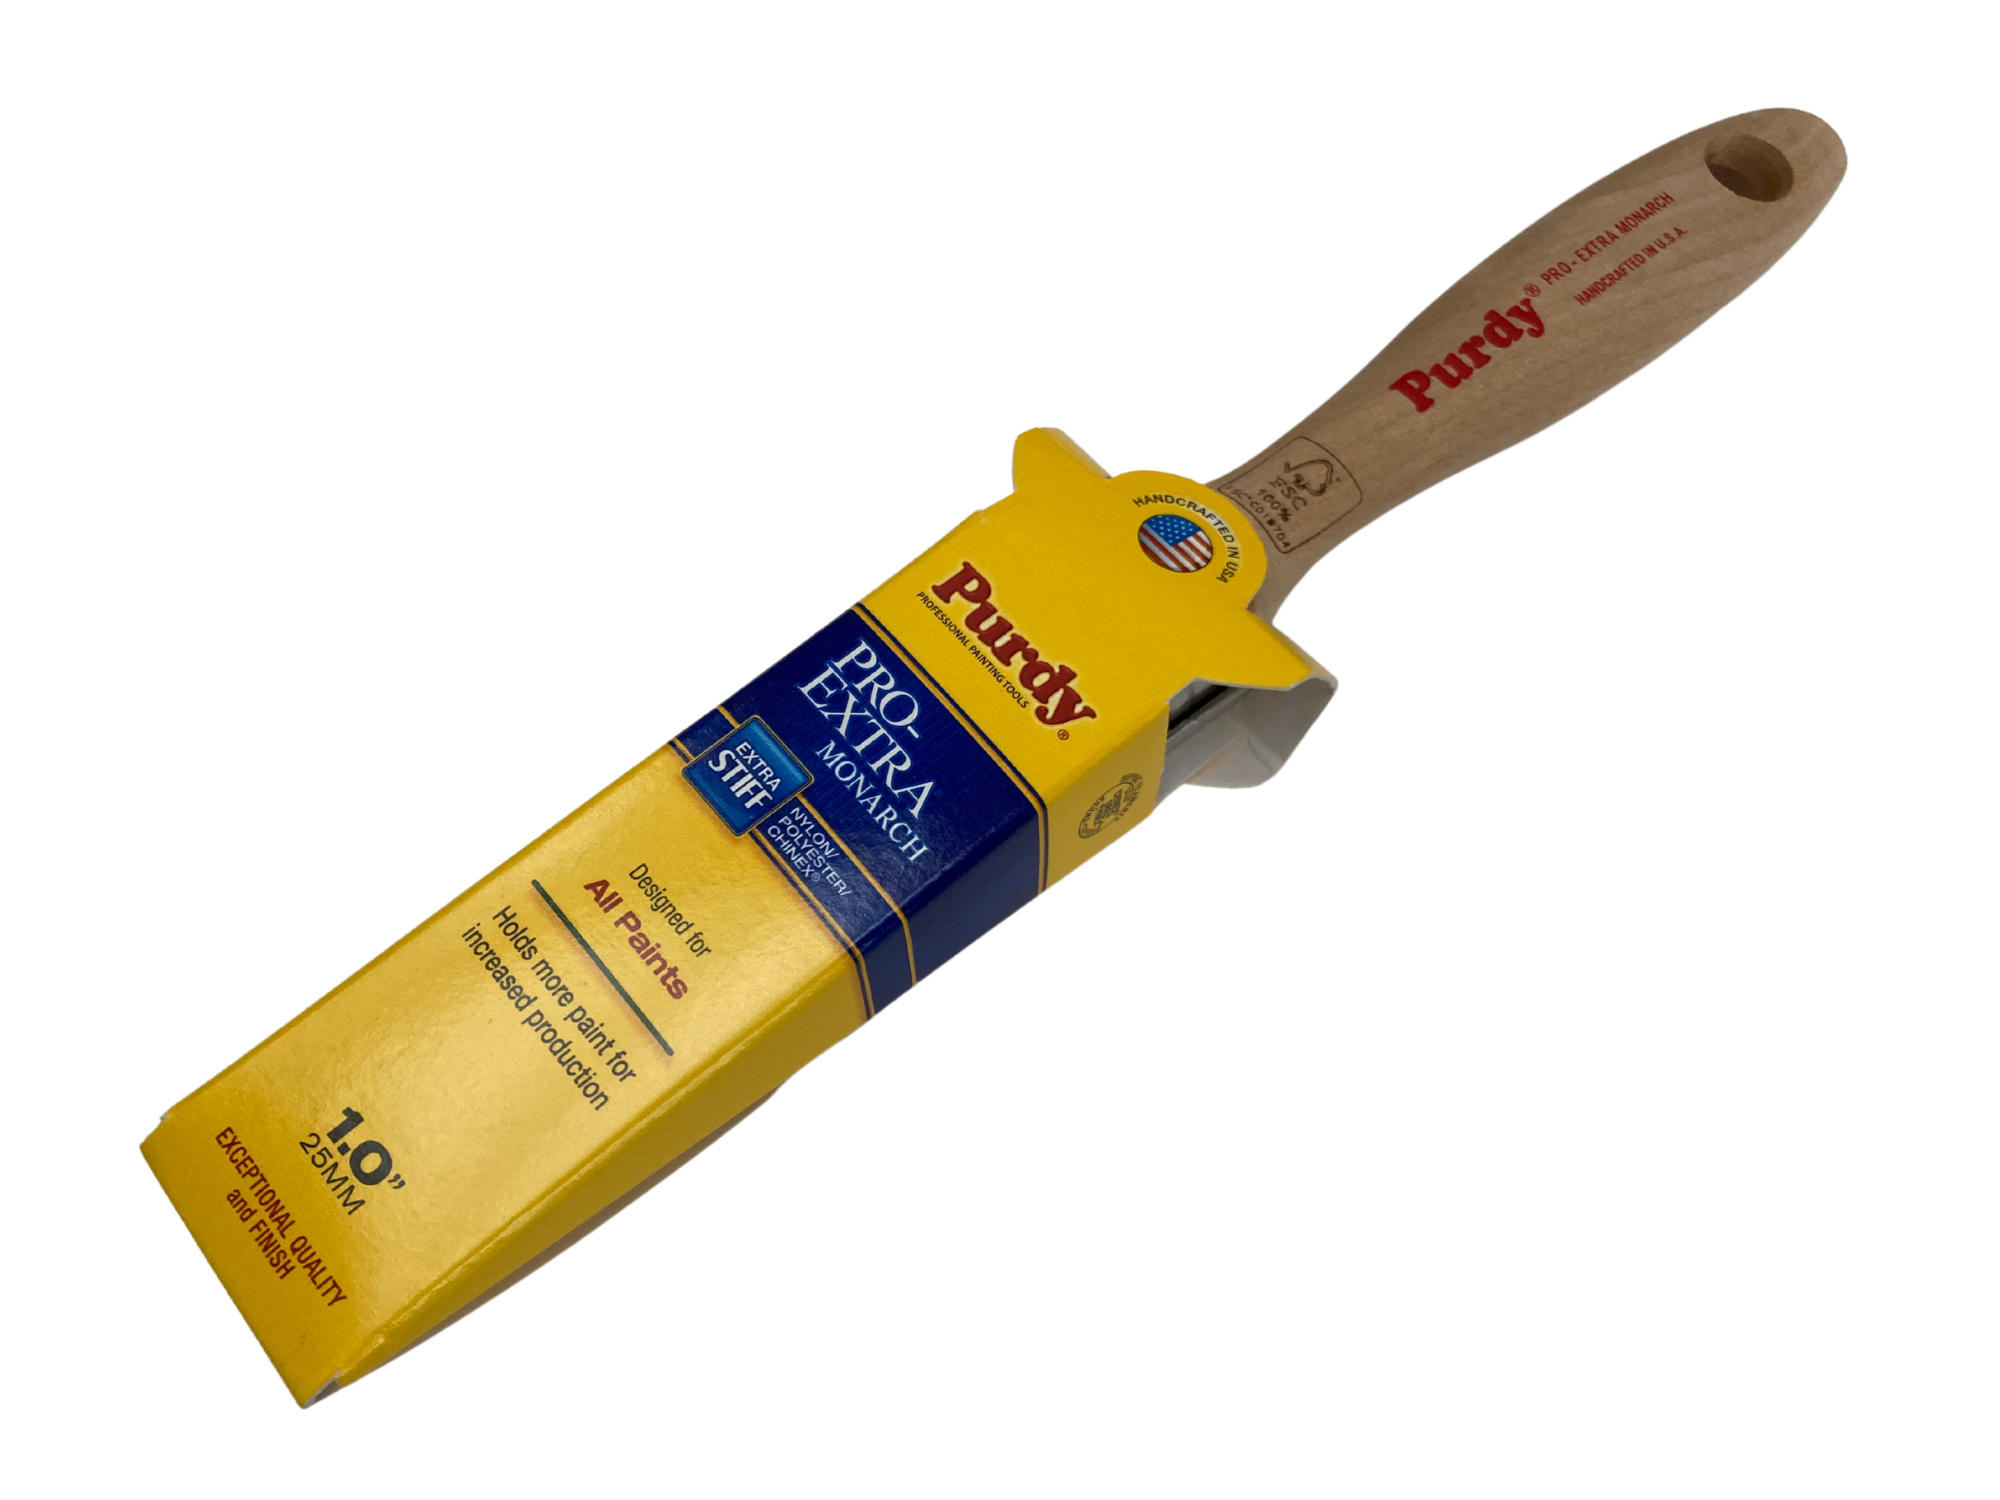 Purdy Paint Brush - Pro Extra Monarch 1 inch